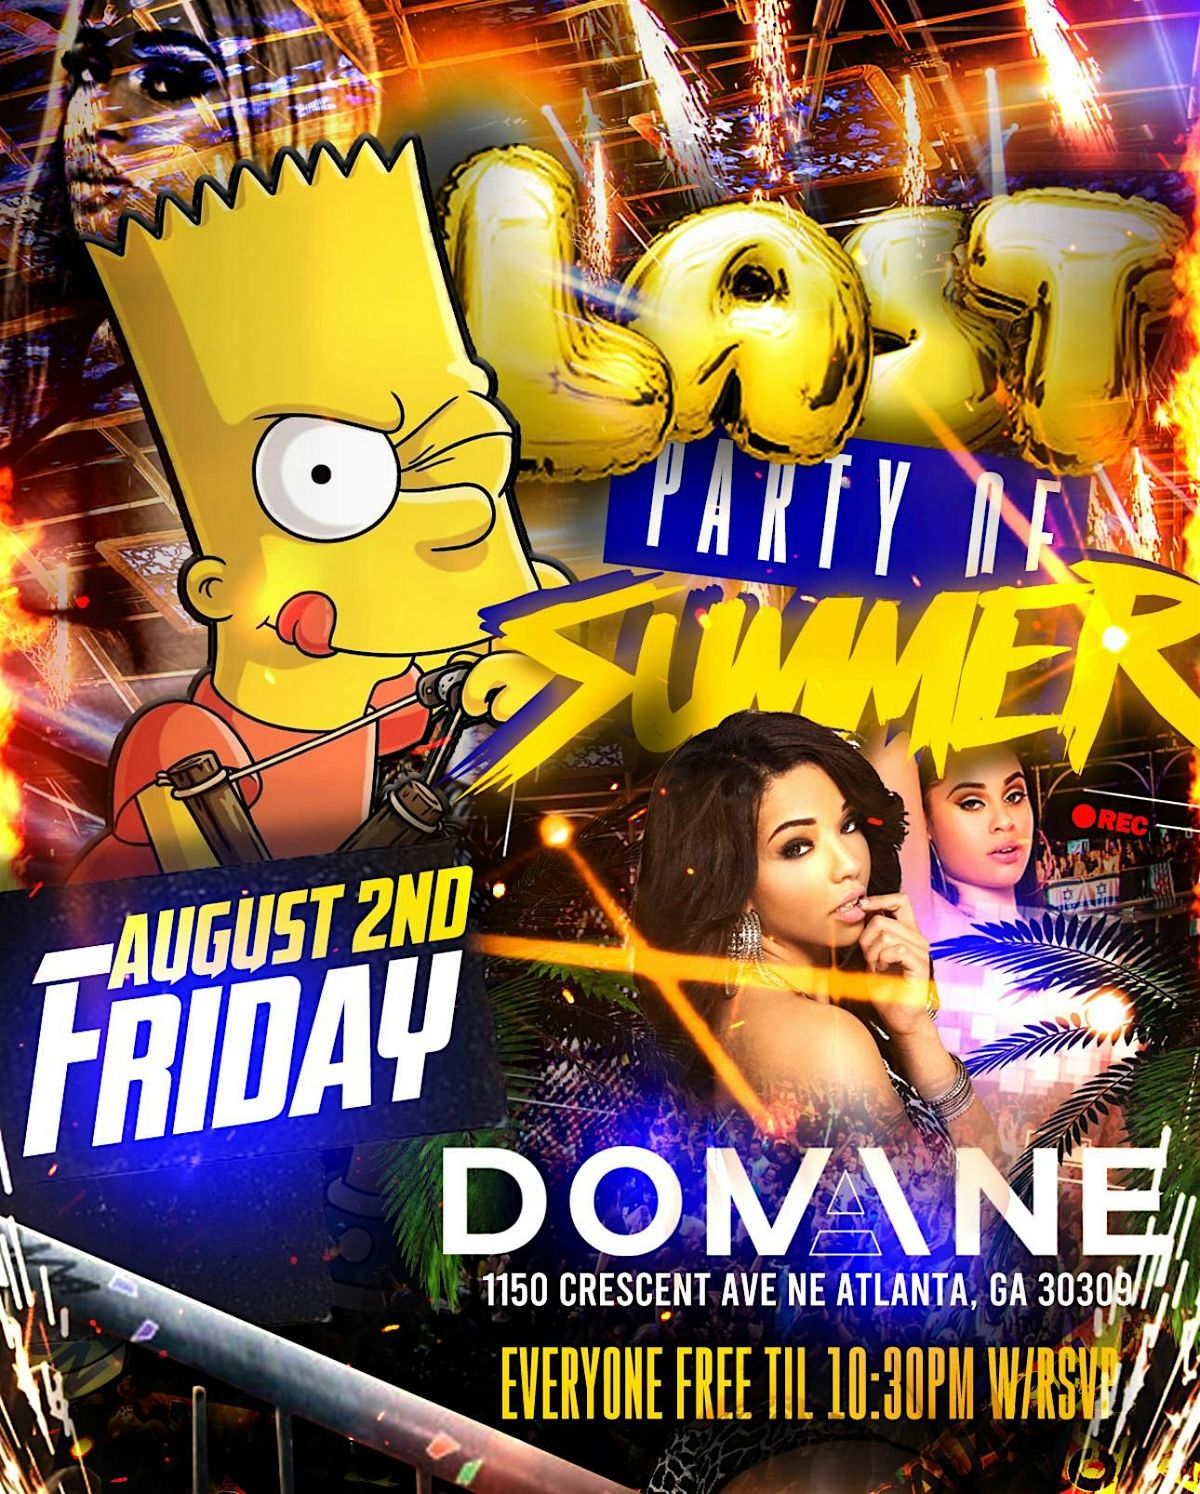 WCTV: LAST PARTY OF THE SUMMER @ DOMAINE